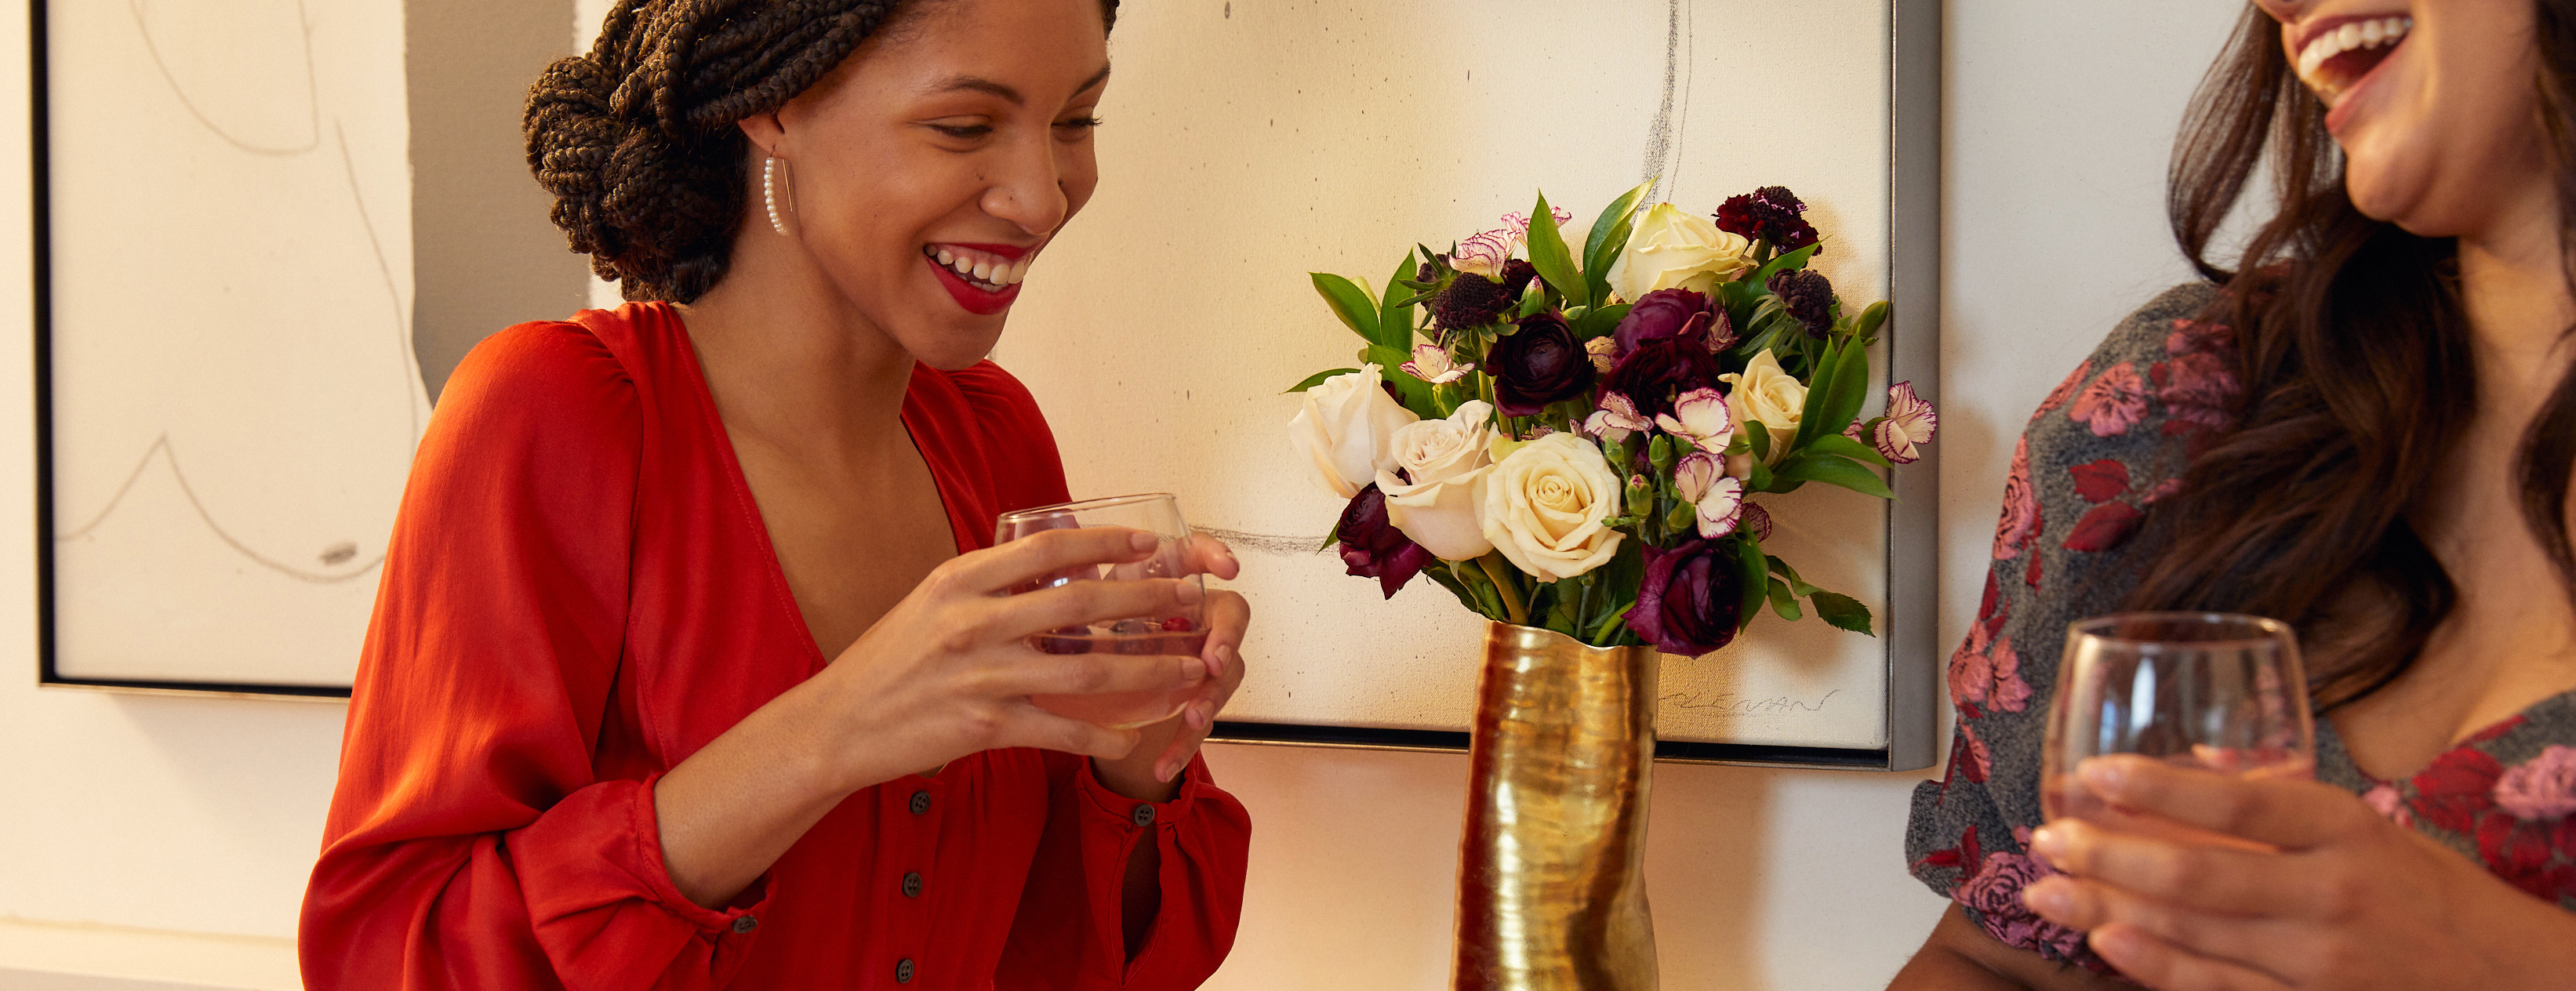 Women celebrating the holidays with a holiday bouquet in a gold vase